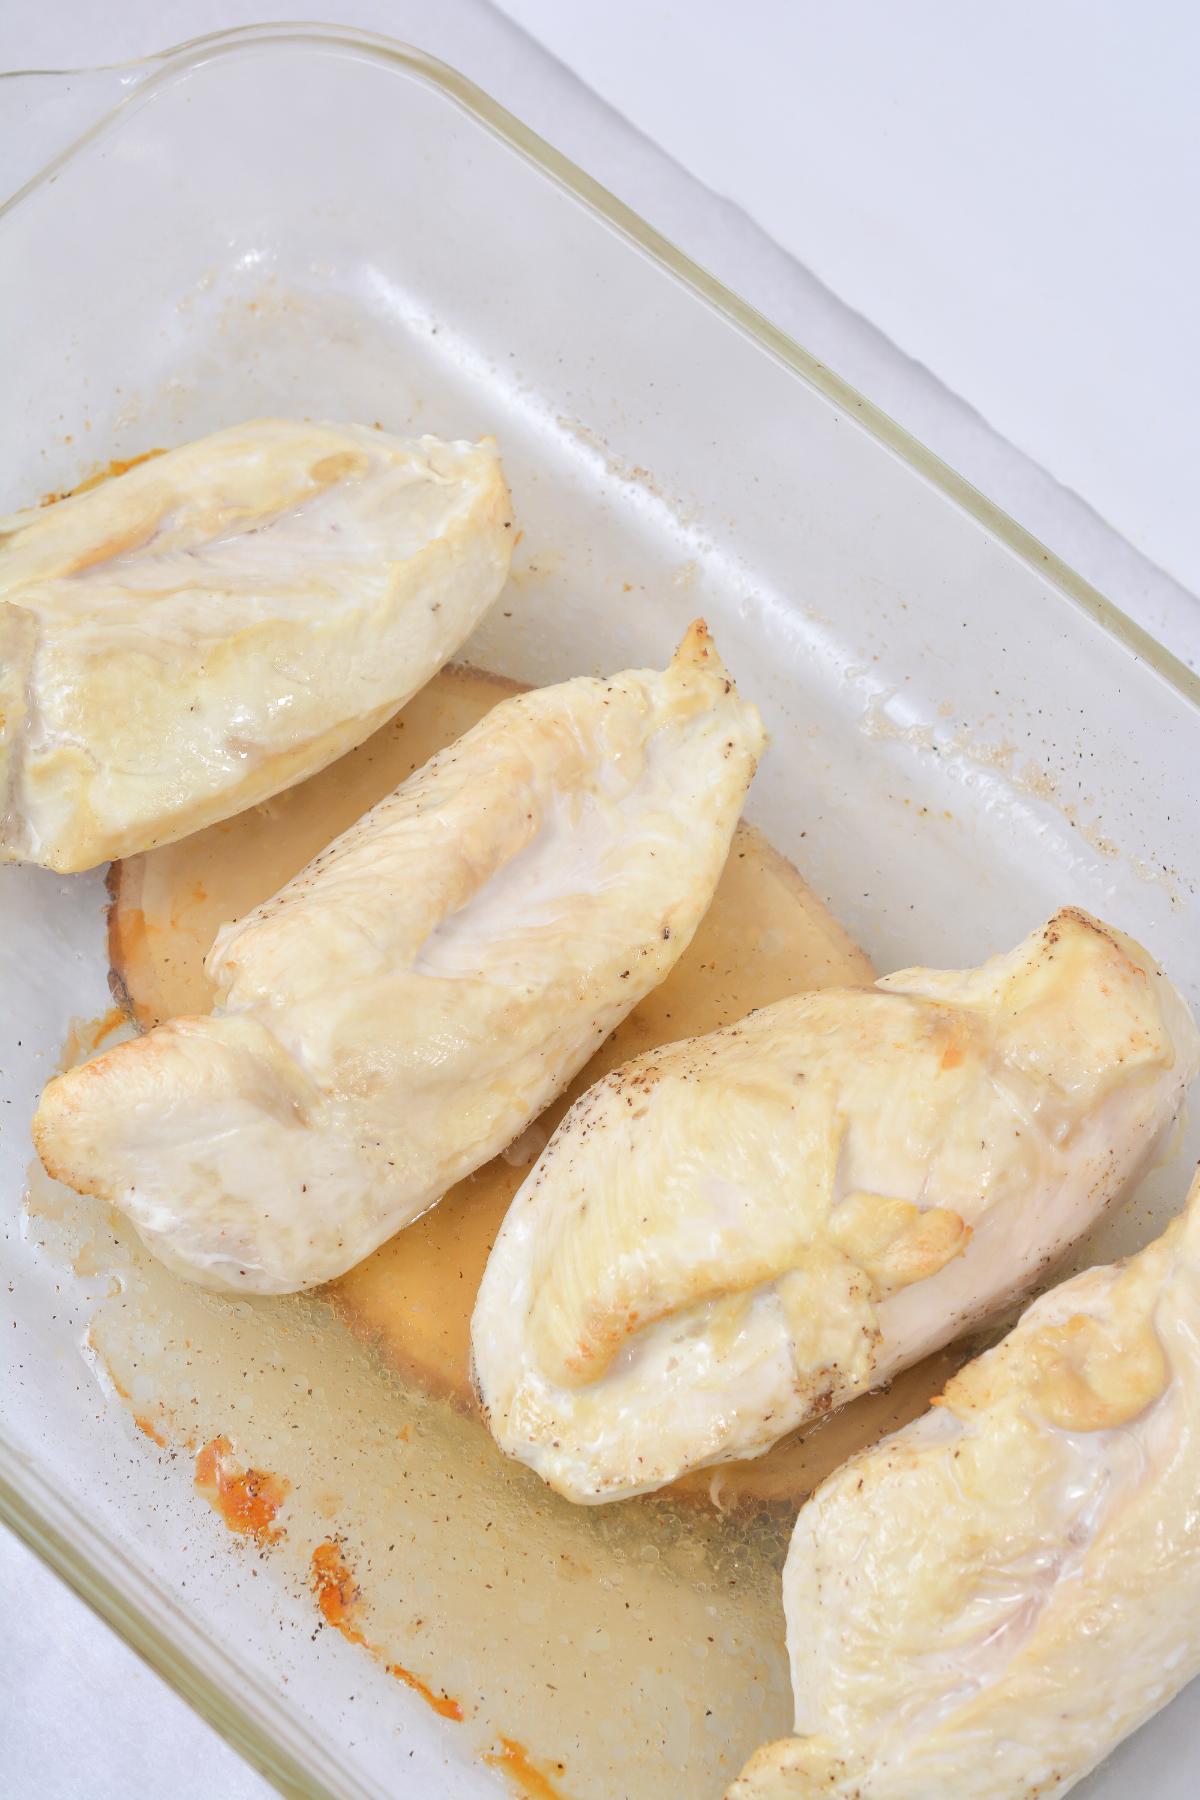 Four pieces of chicken breast in a baking dish